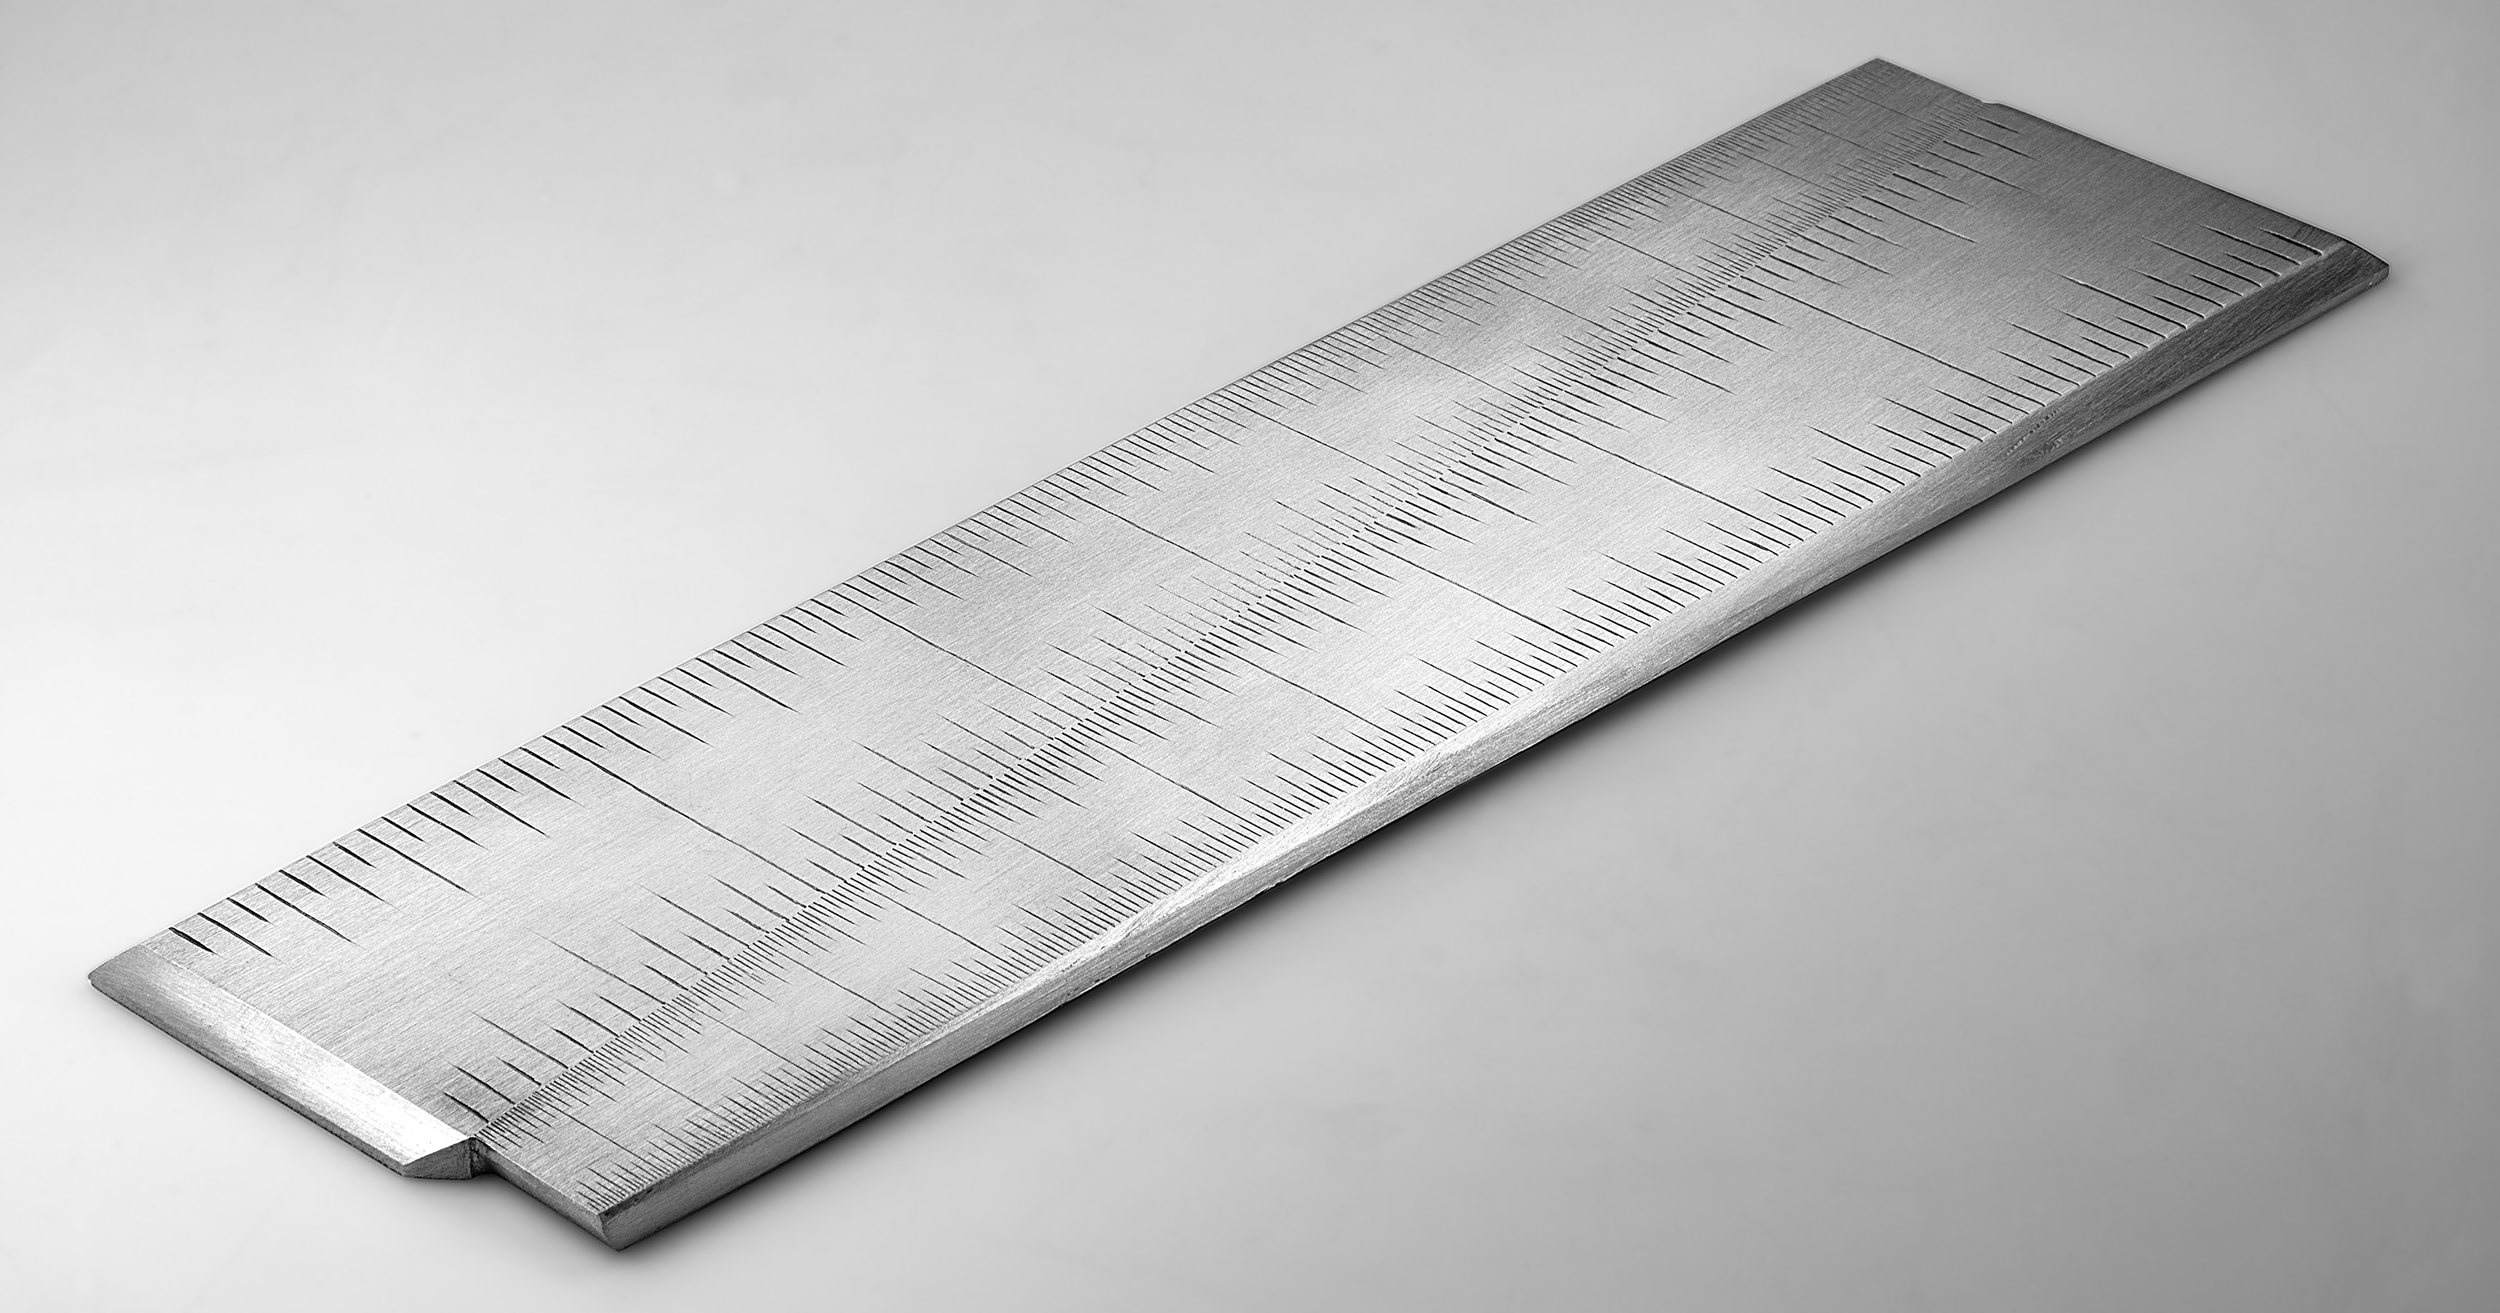 Instrument #180, hand engraved aluminum and ink, 12.25" x 3.25" x .25"